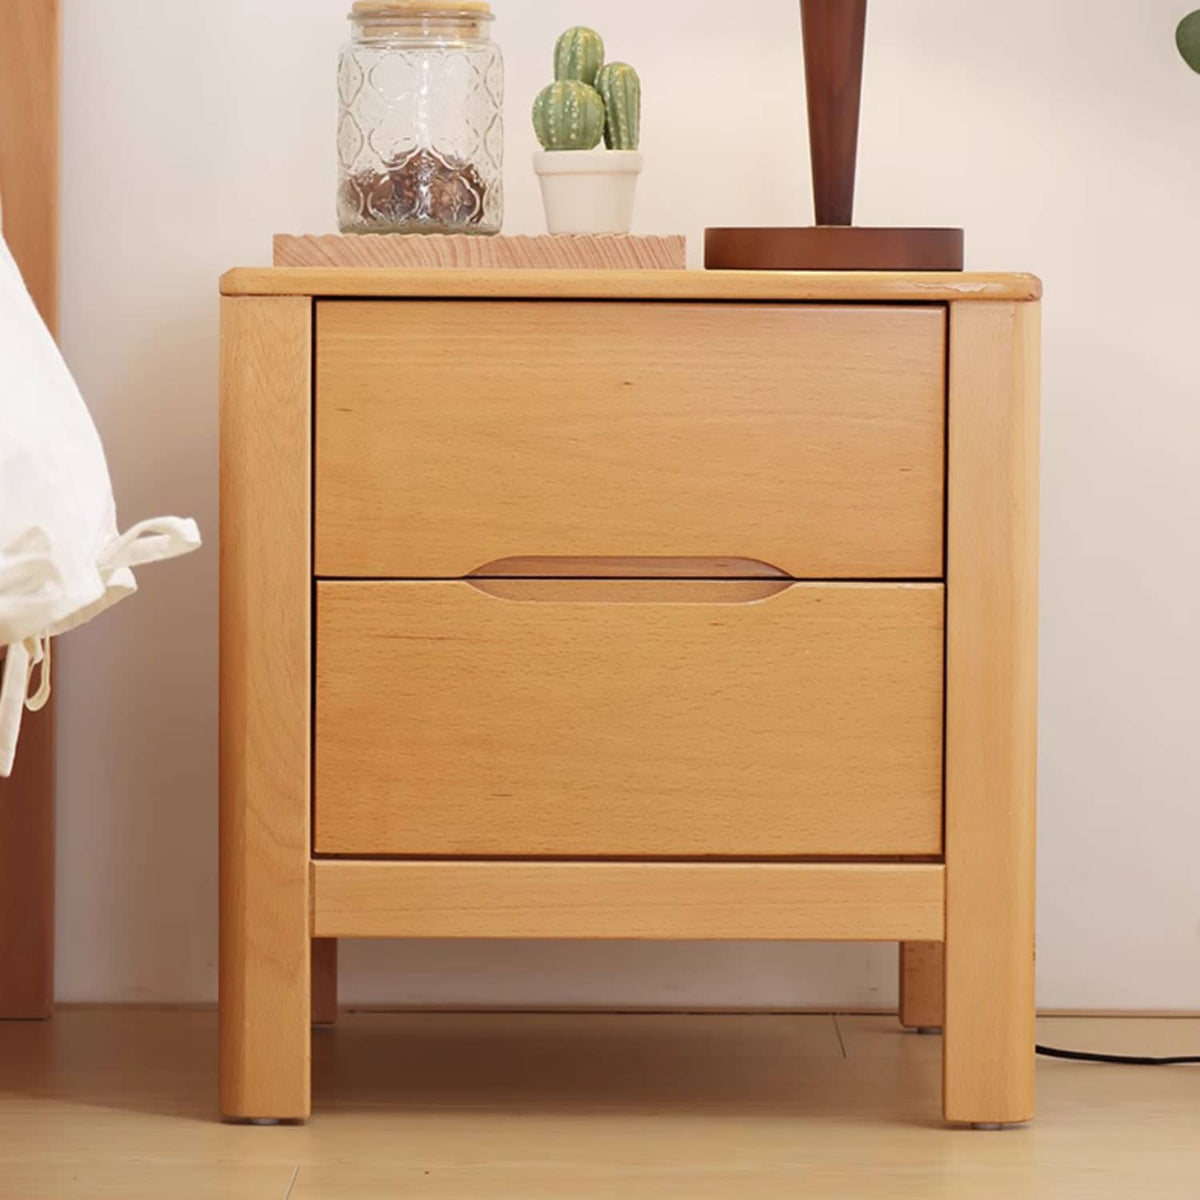 Charming Natural Brown & White Beech Wood Bedside Cupboard – Stylish Bedroom Storage Solution fslmz-1101